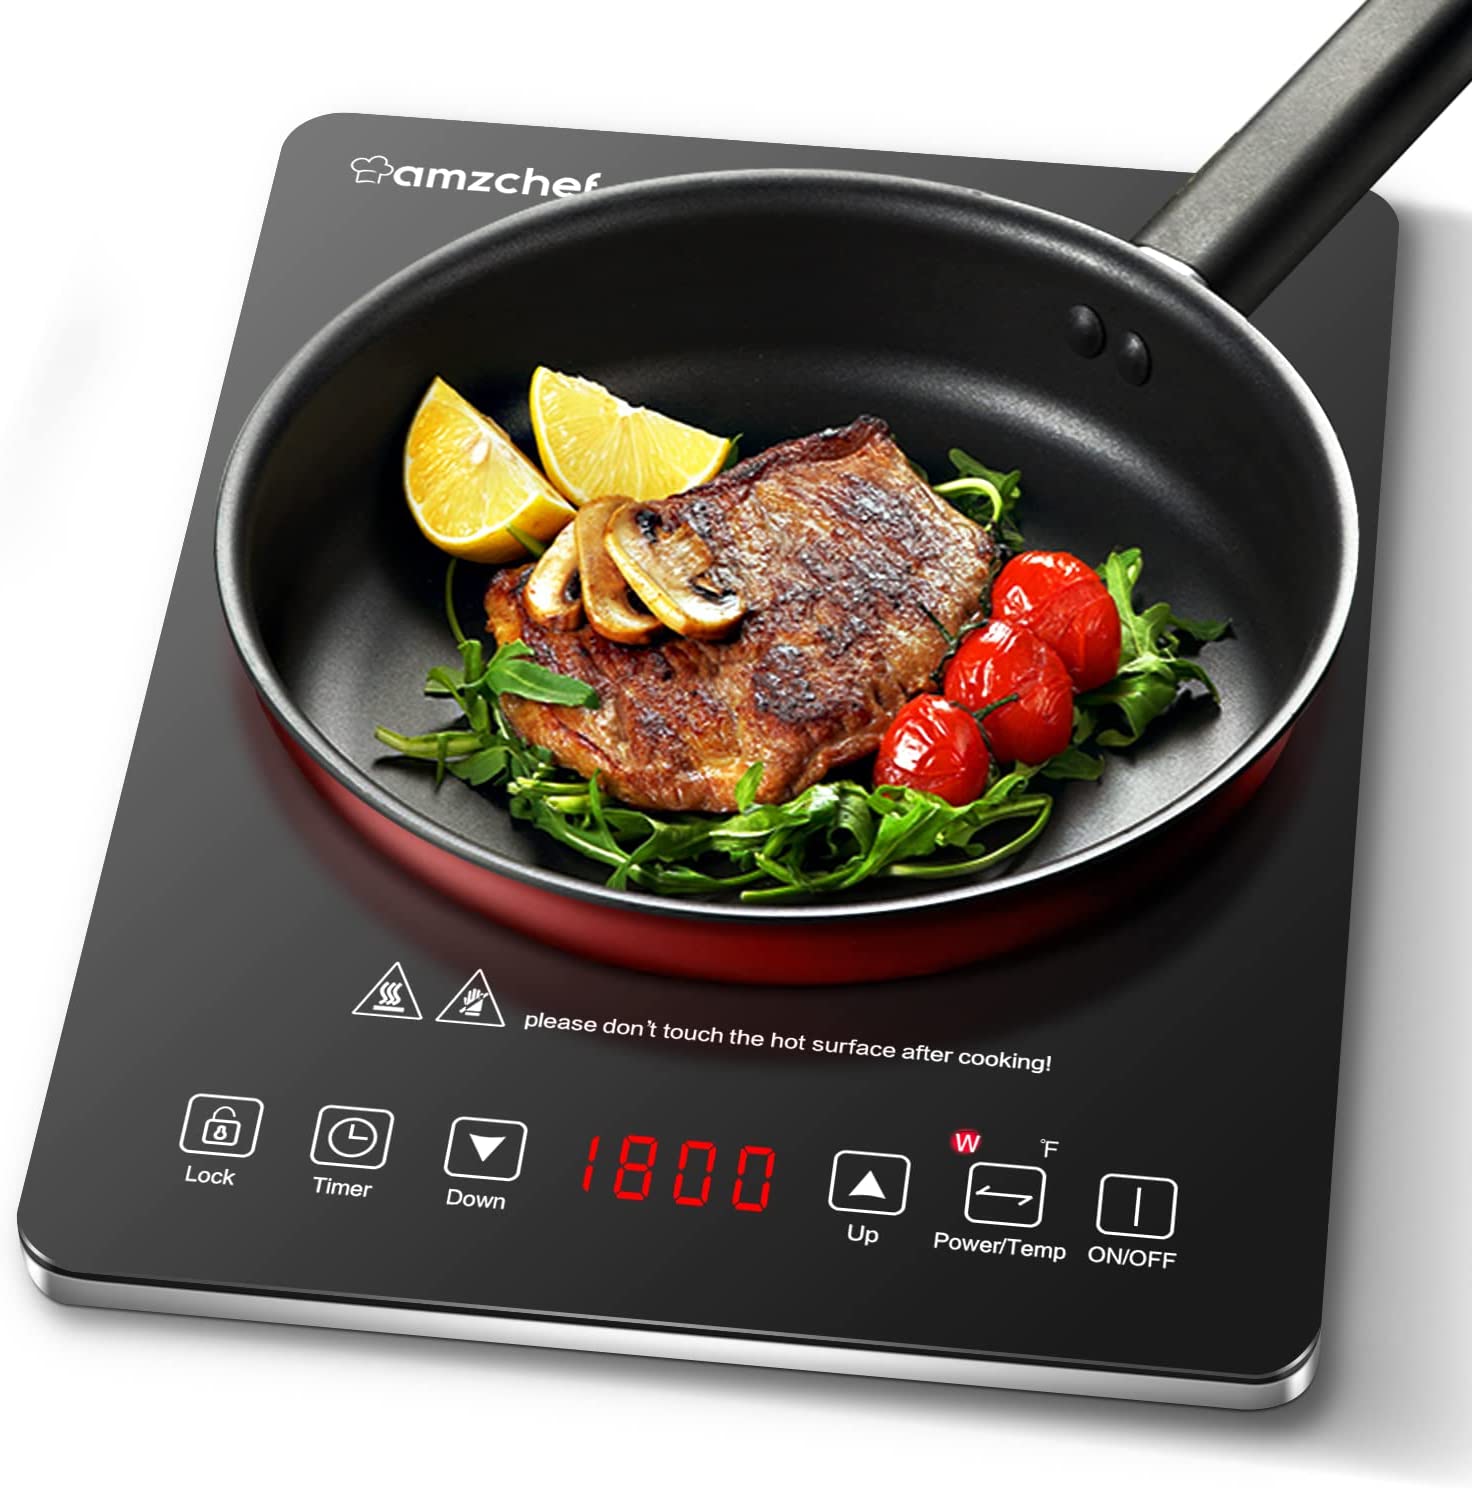 Portable Single Induction Cooktop Countertop Burner Hot Plate with Fast  Heating Mode,10 Temperature With Bonus Pan, Black 